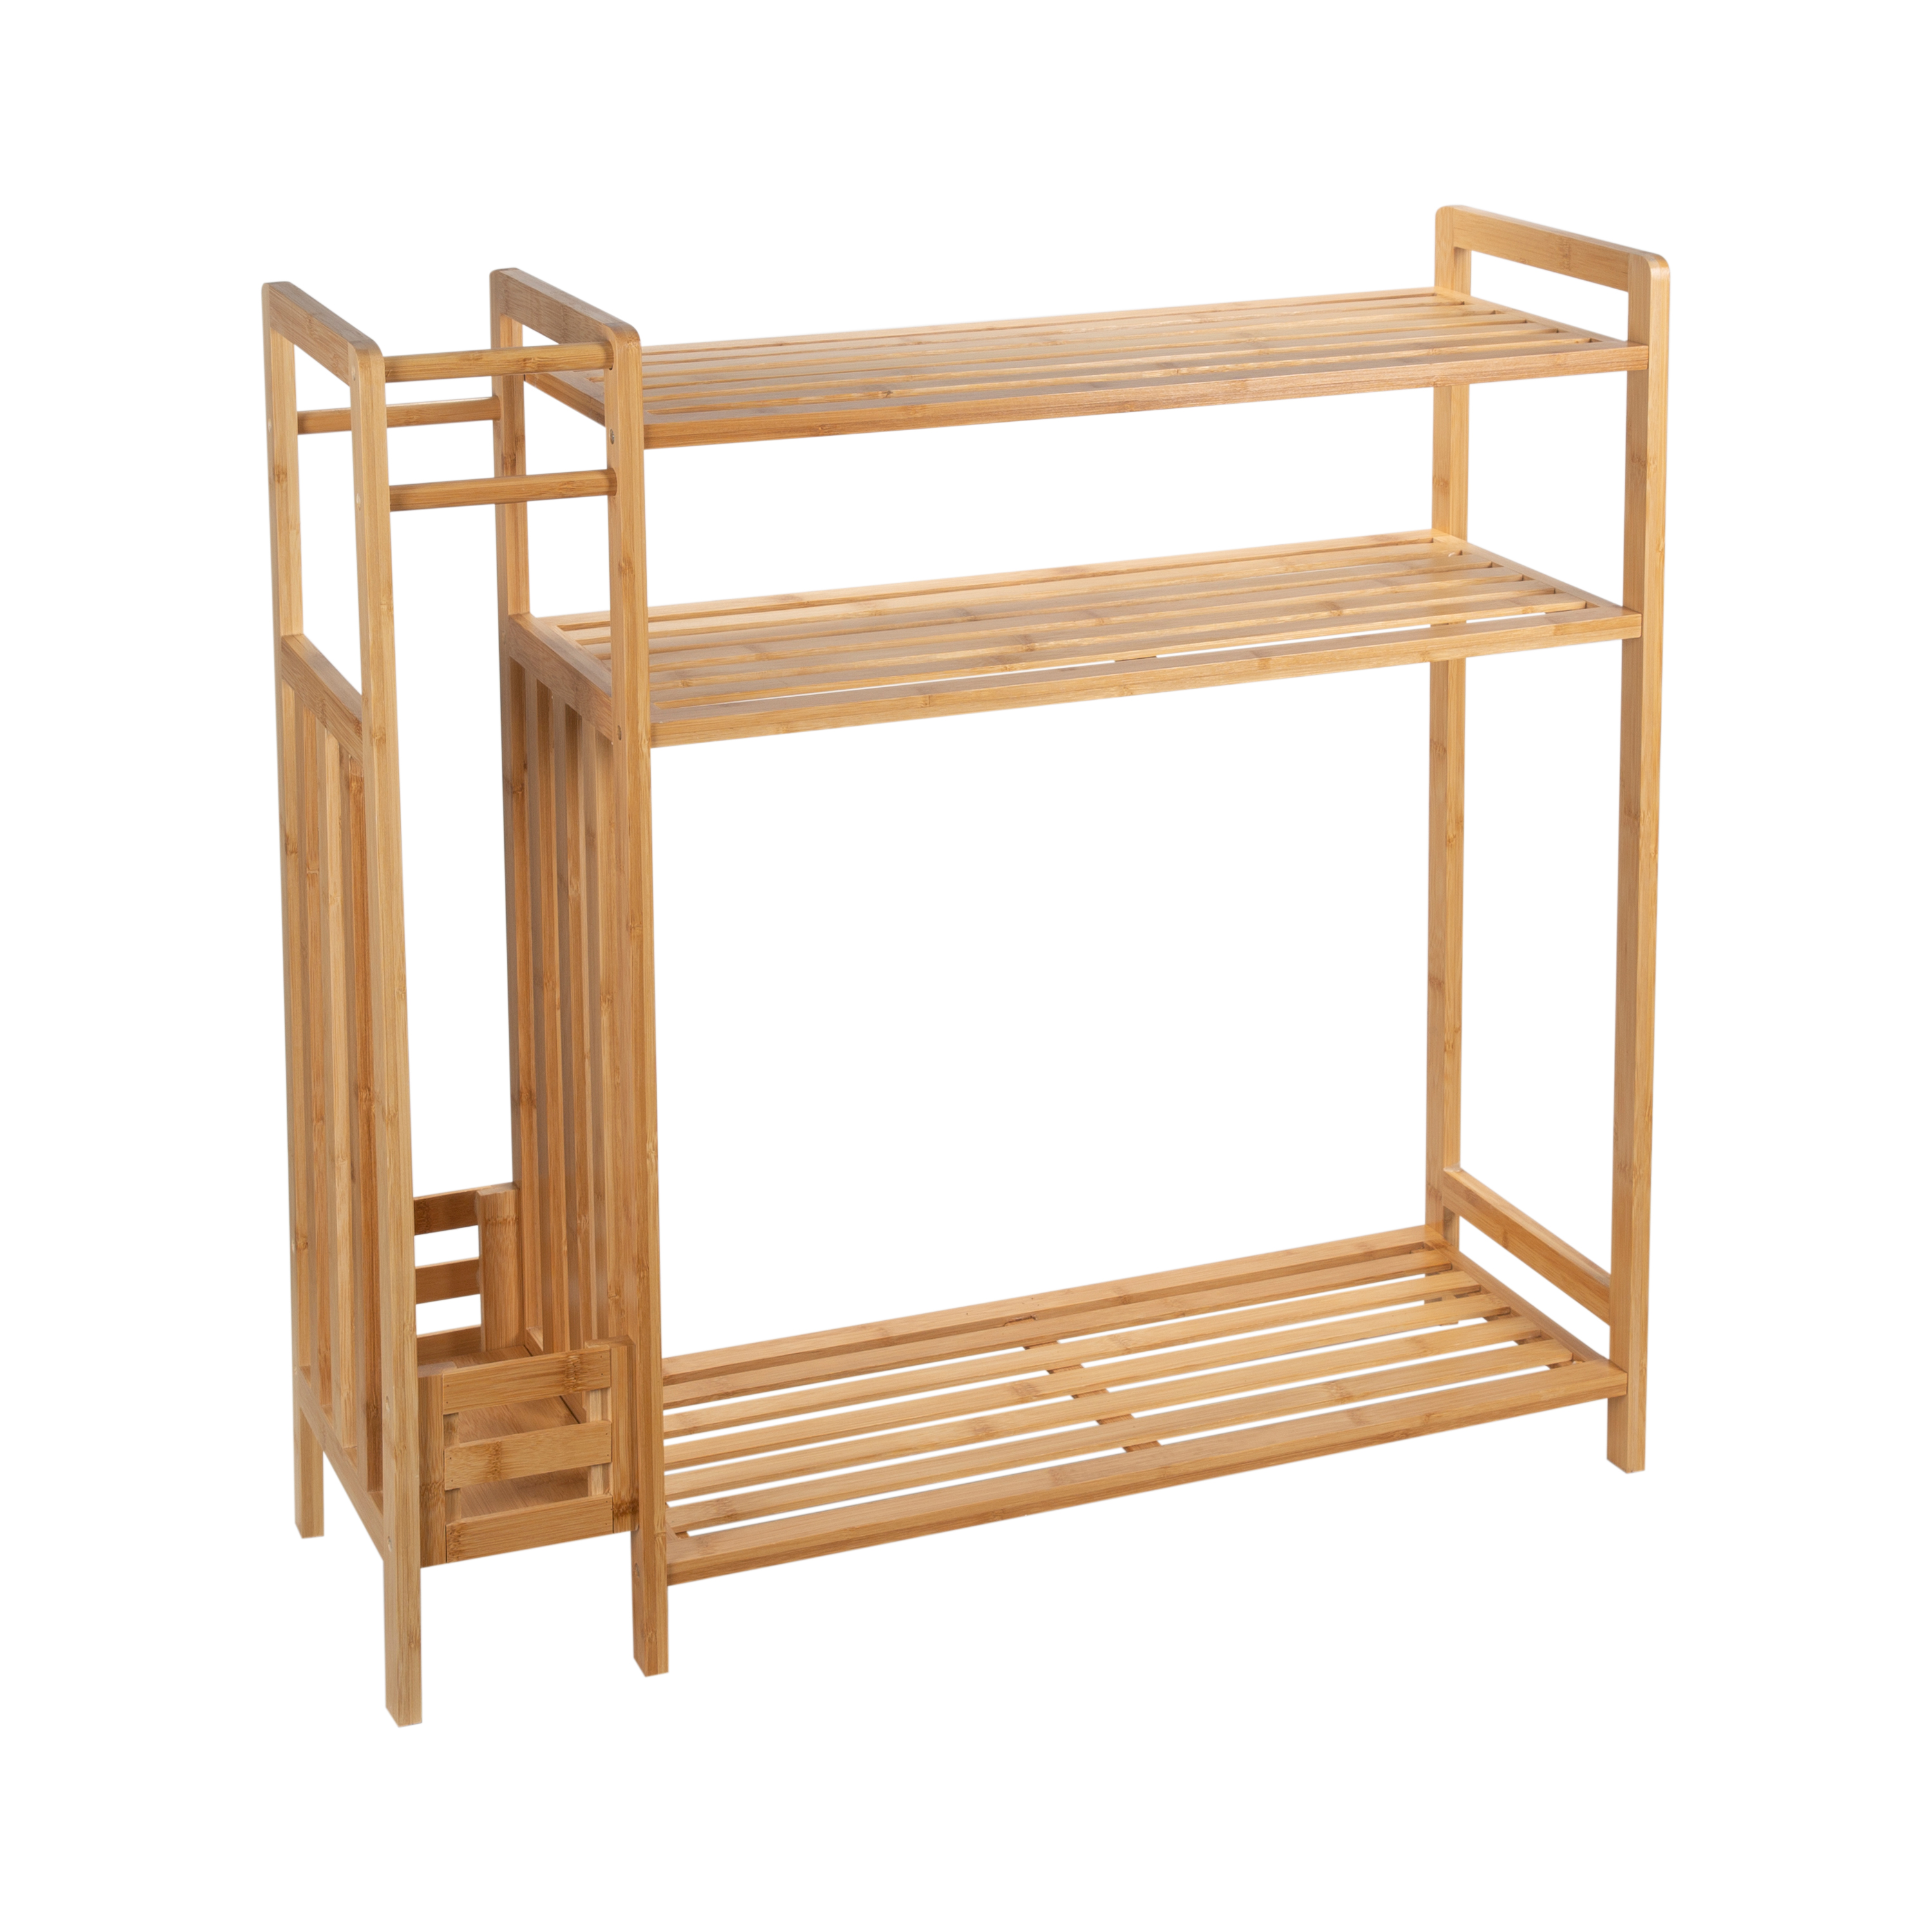 Organize It All Bamboo Shoe Rack with Umbrella Stand - image 1 of 10